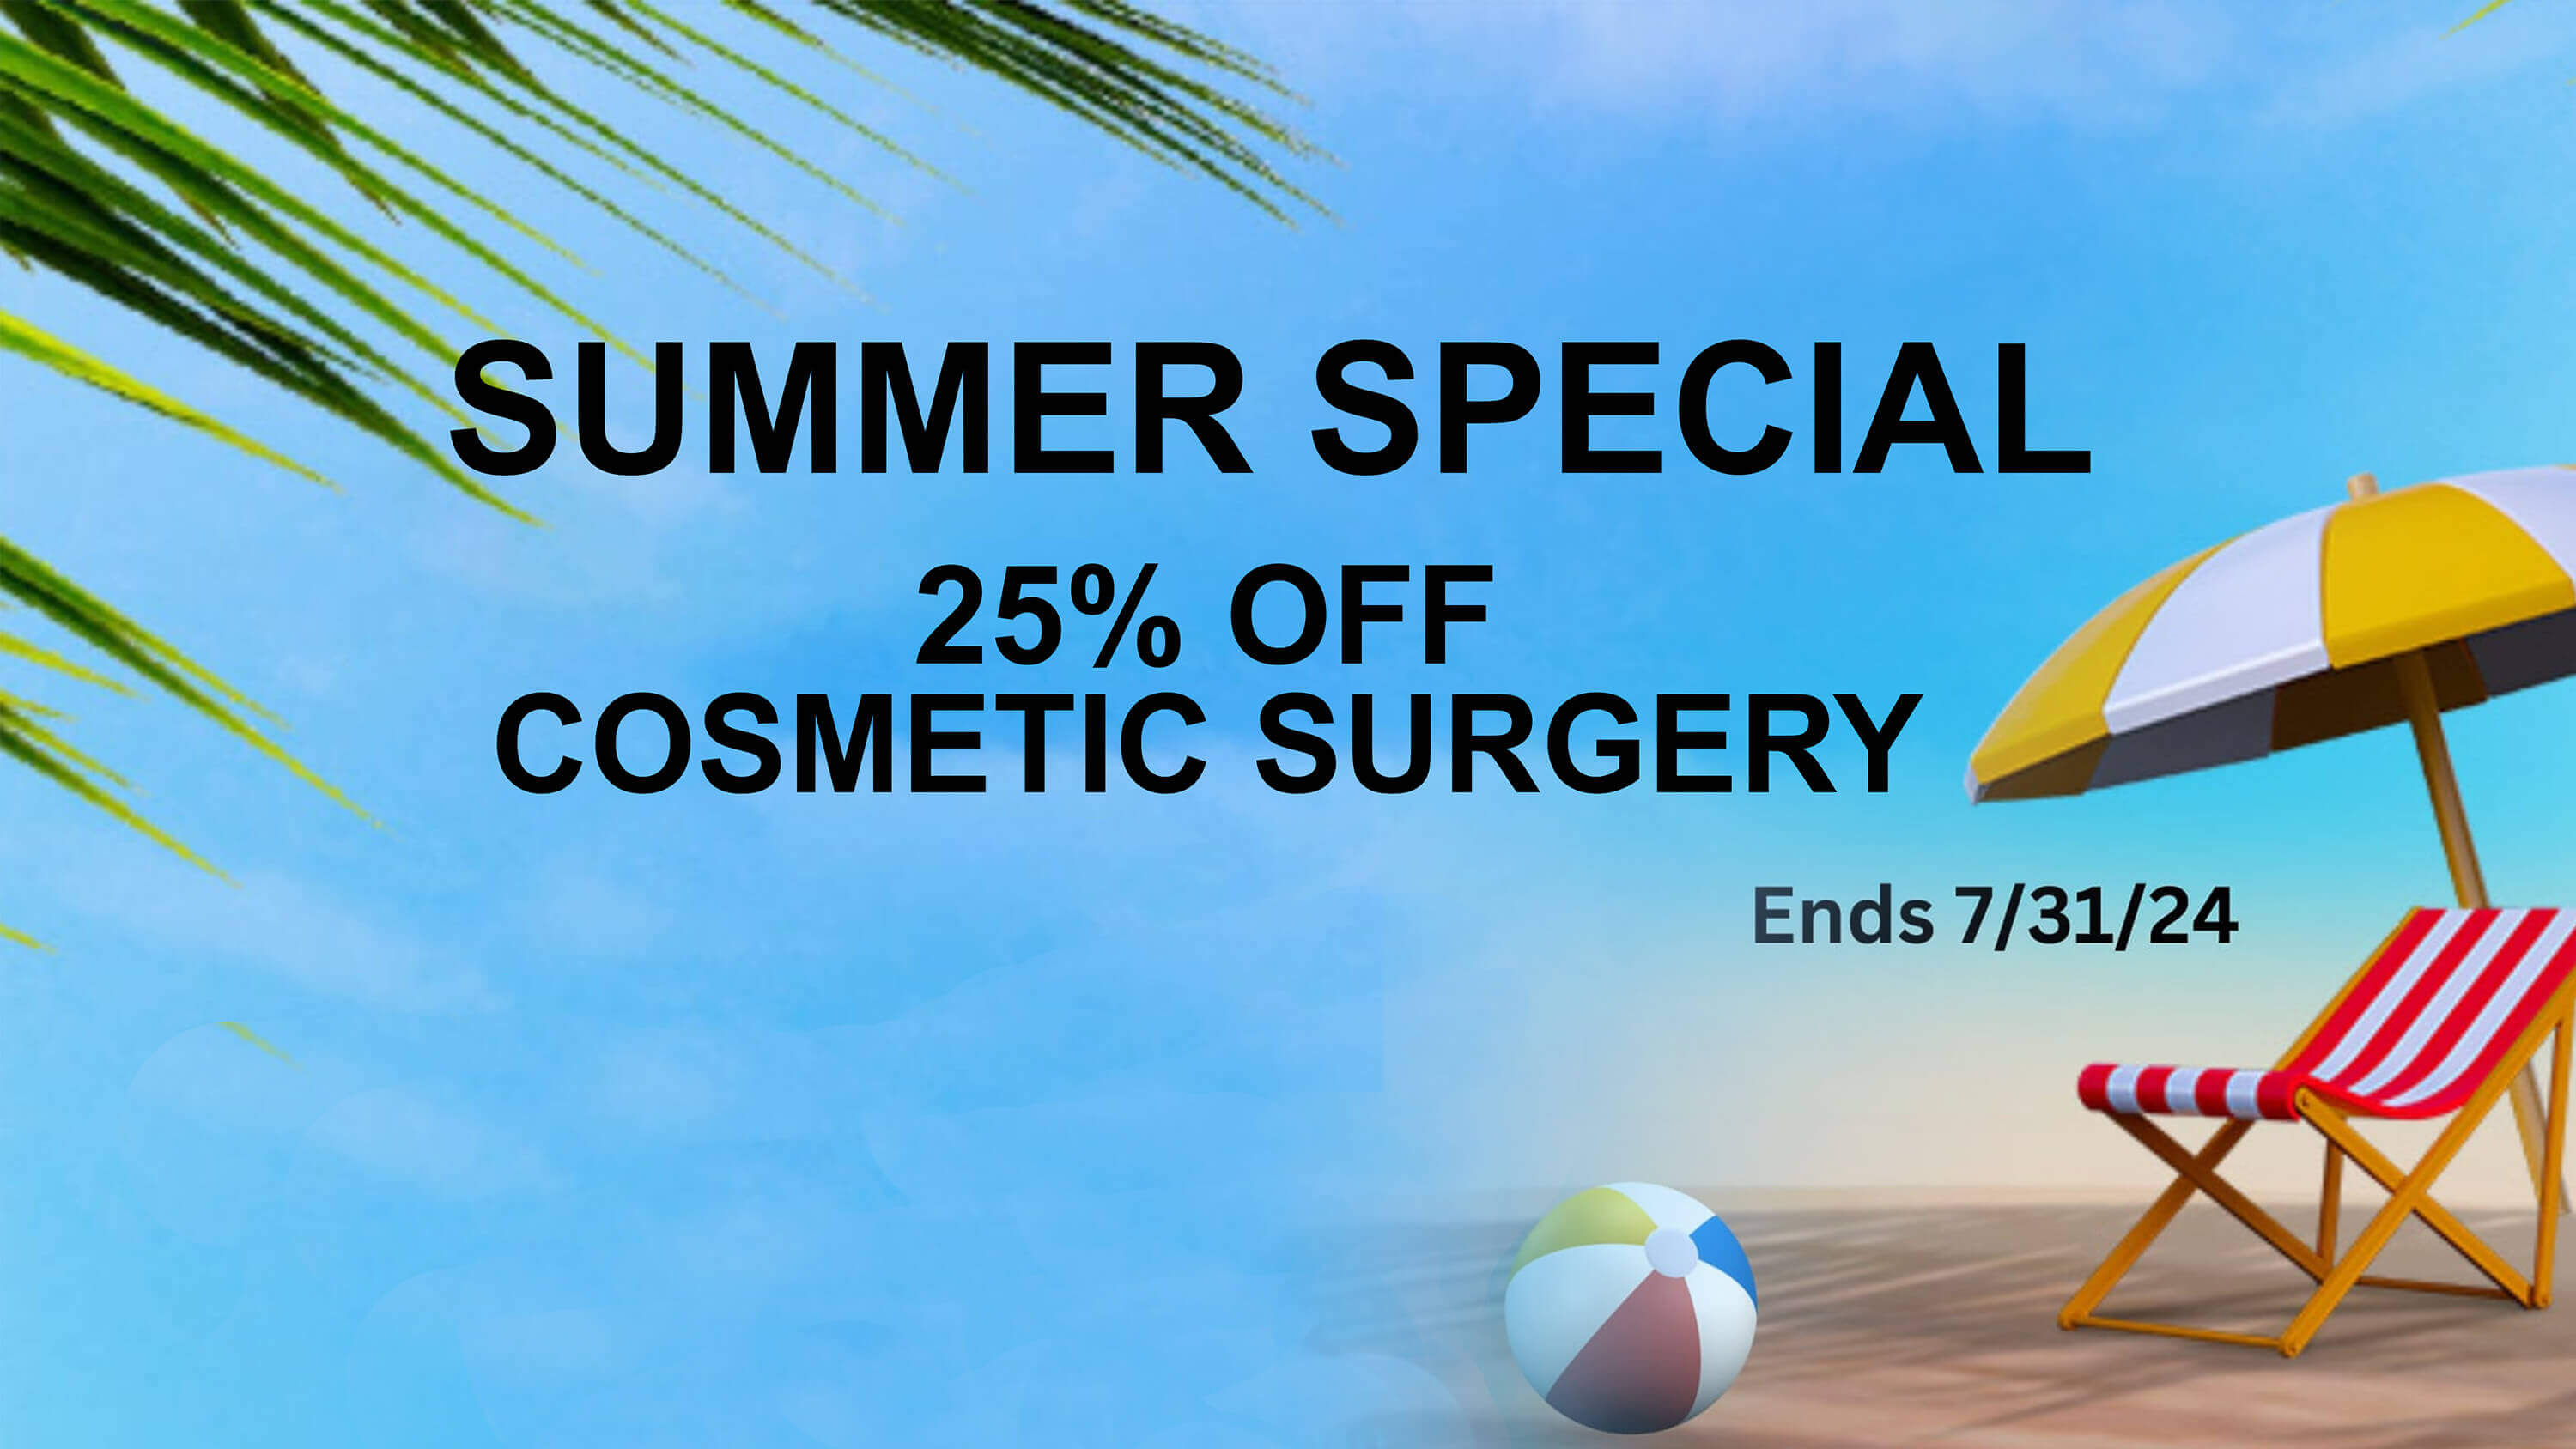 Summer Special - 25% OFF Cosmetic Surgery